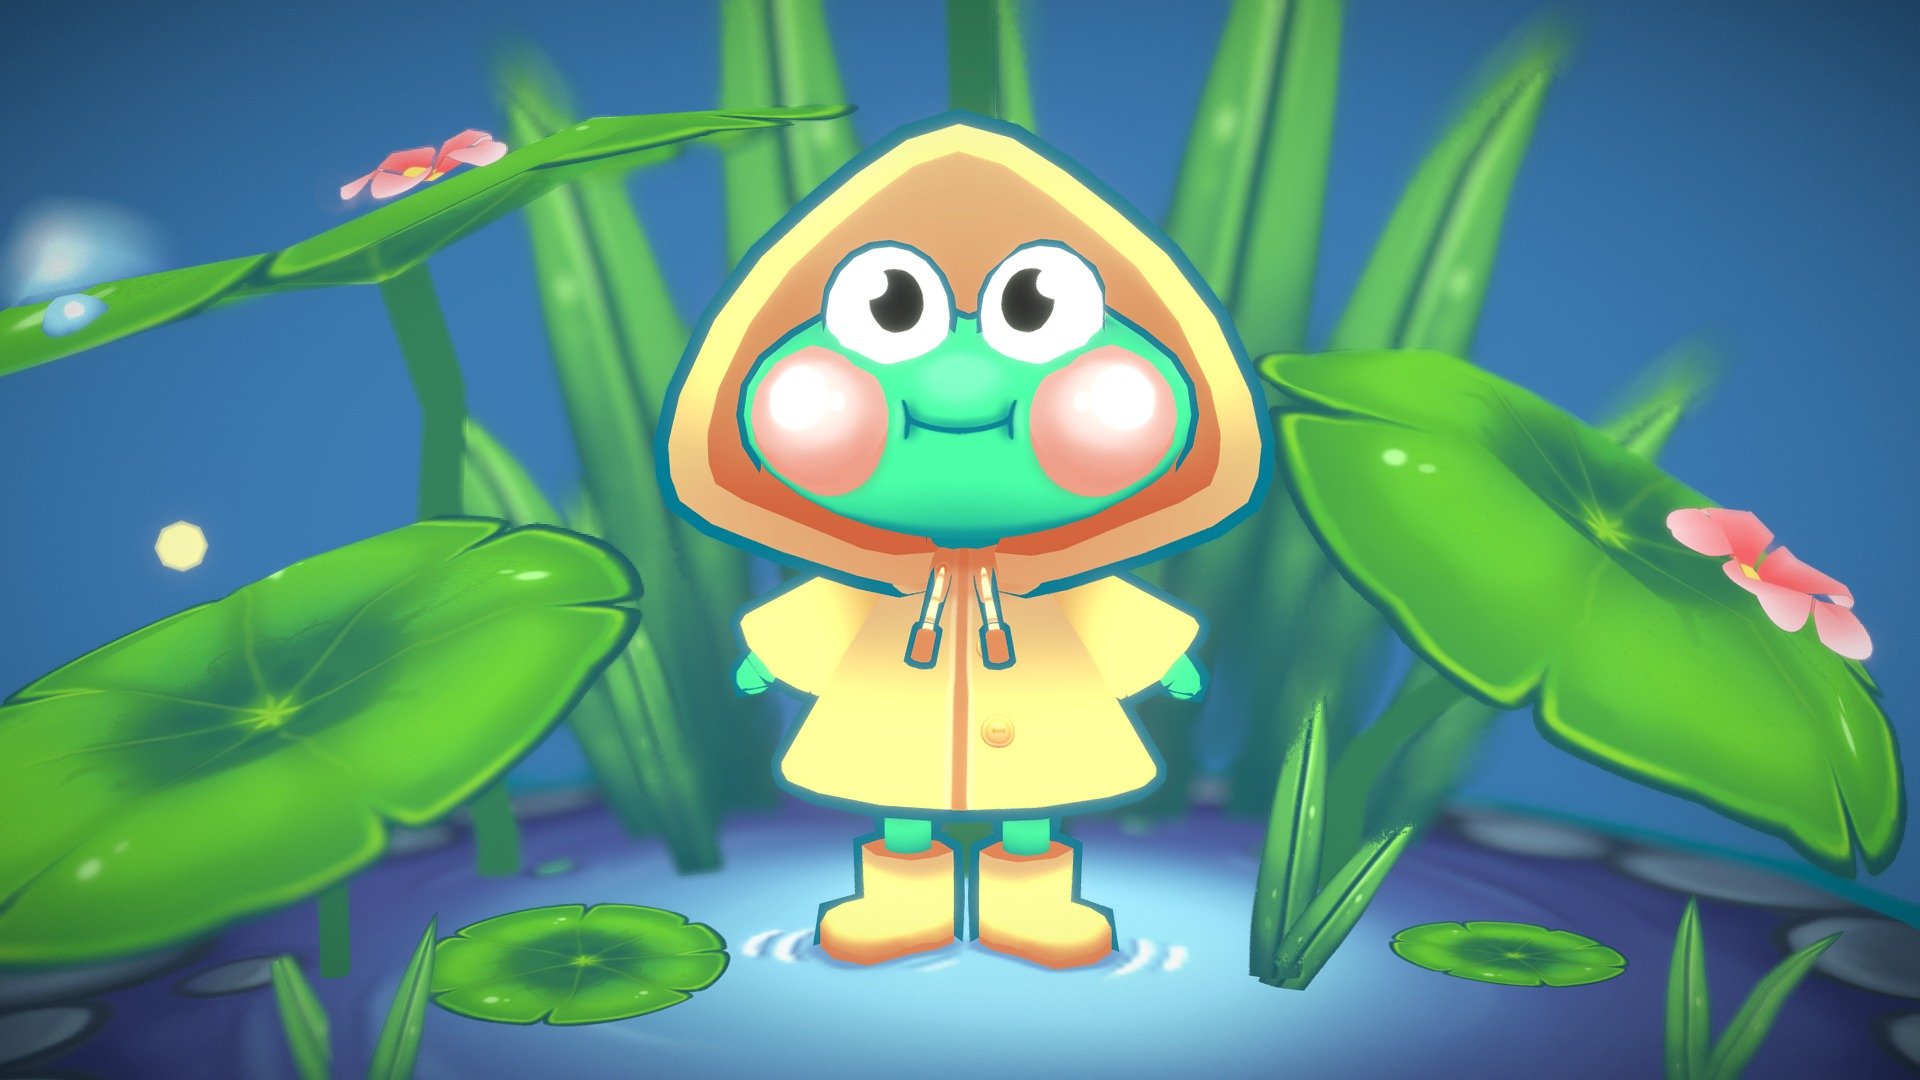 Don't let the rain get you down! put on your raincoat like our little froggy friend here and splash around!

Just a quick something to play around with some sketch fab features! 

Modeled in Maya, textured with Photoshop - Rainy Day - 3D model by Erin Halpenny (@erinhalpenny) 3d model